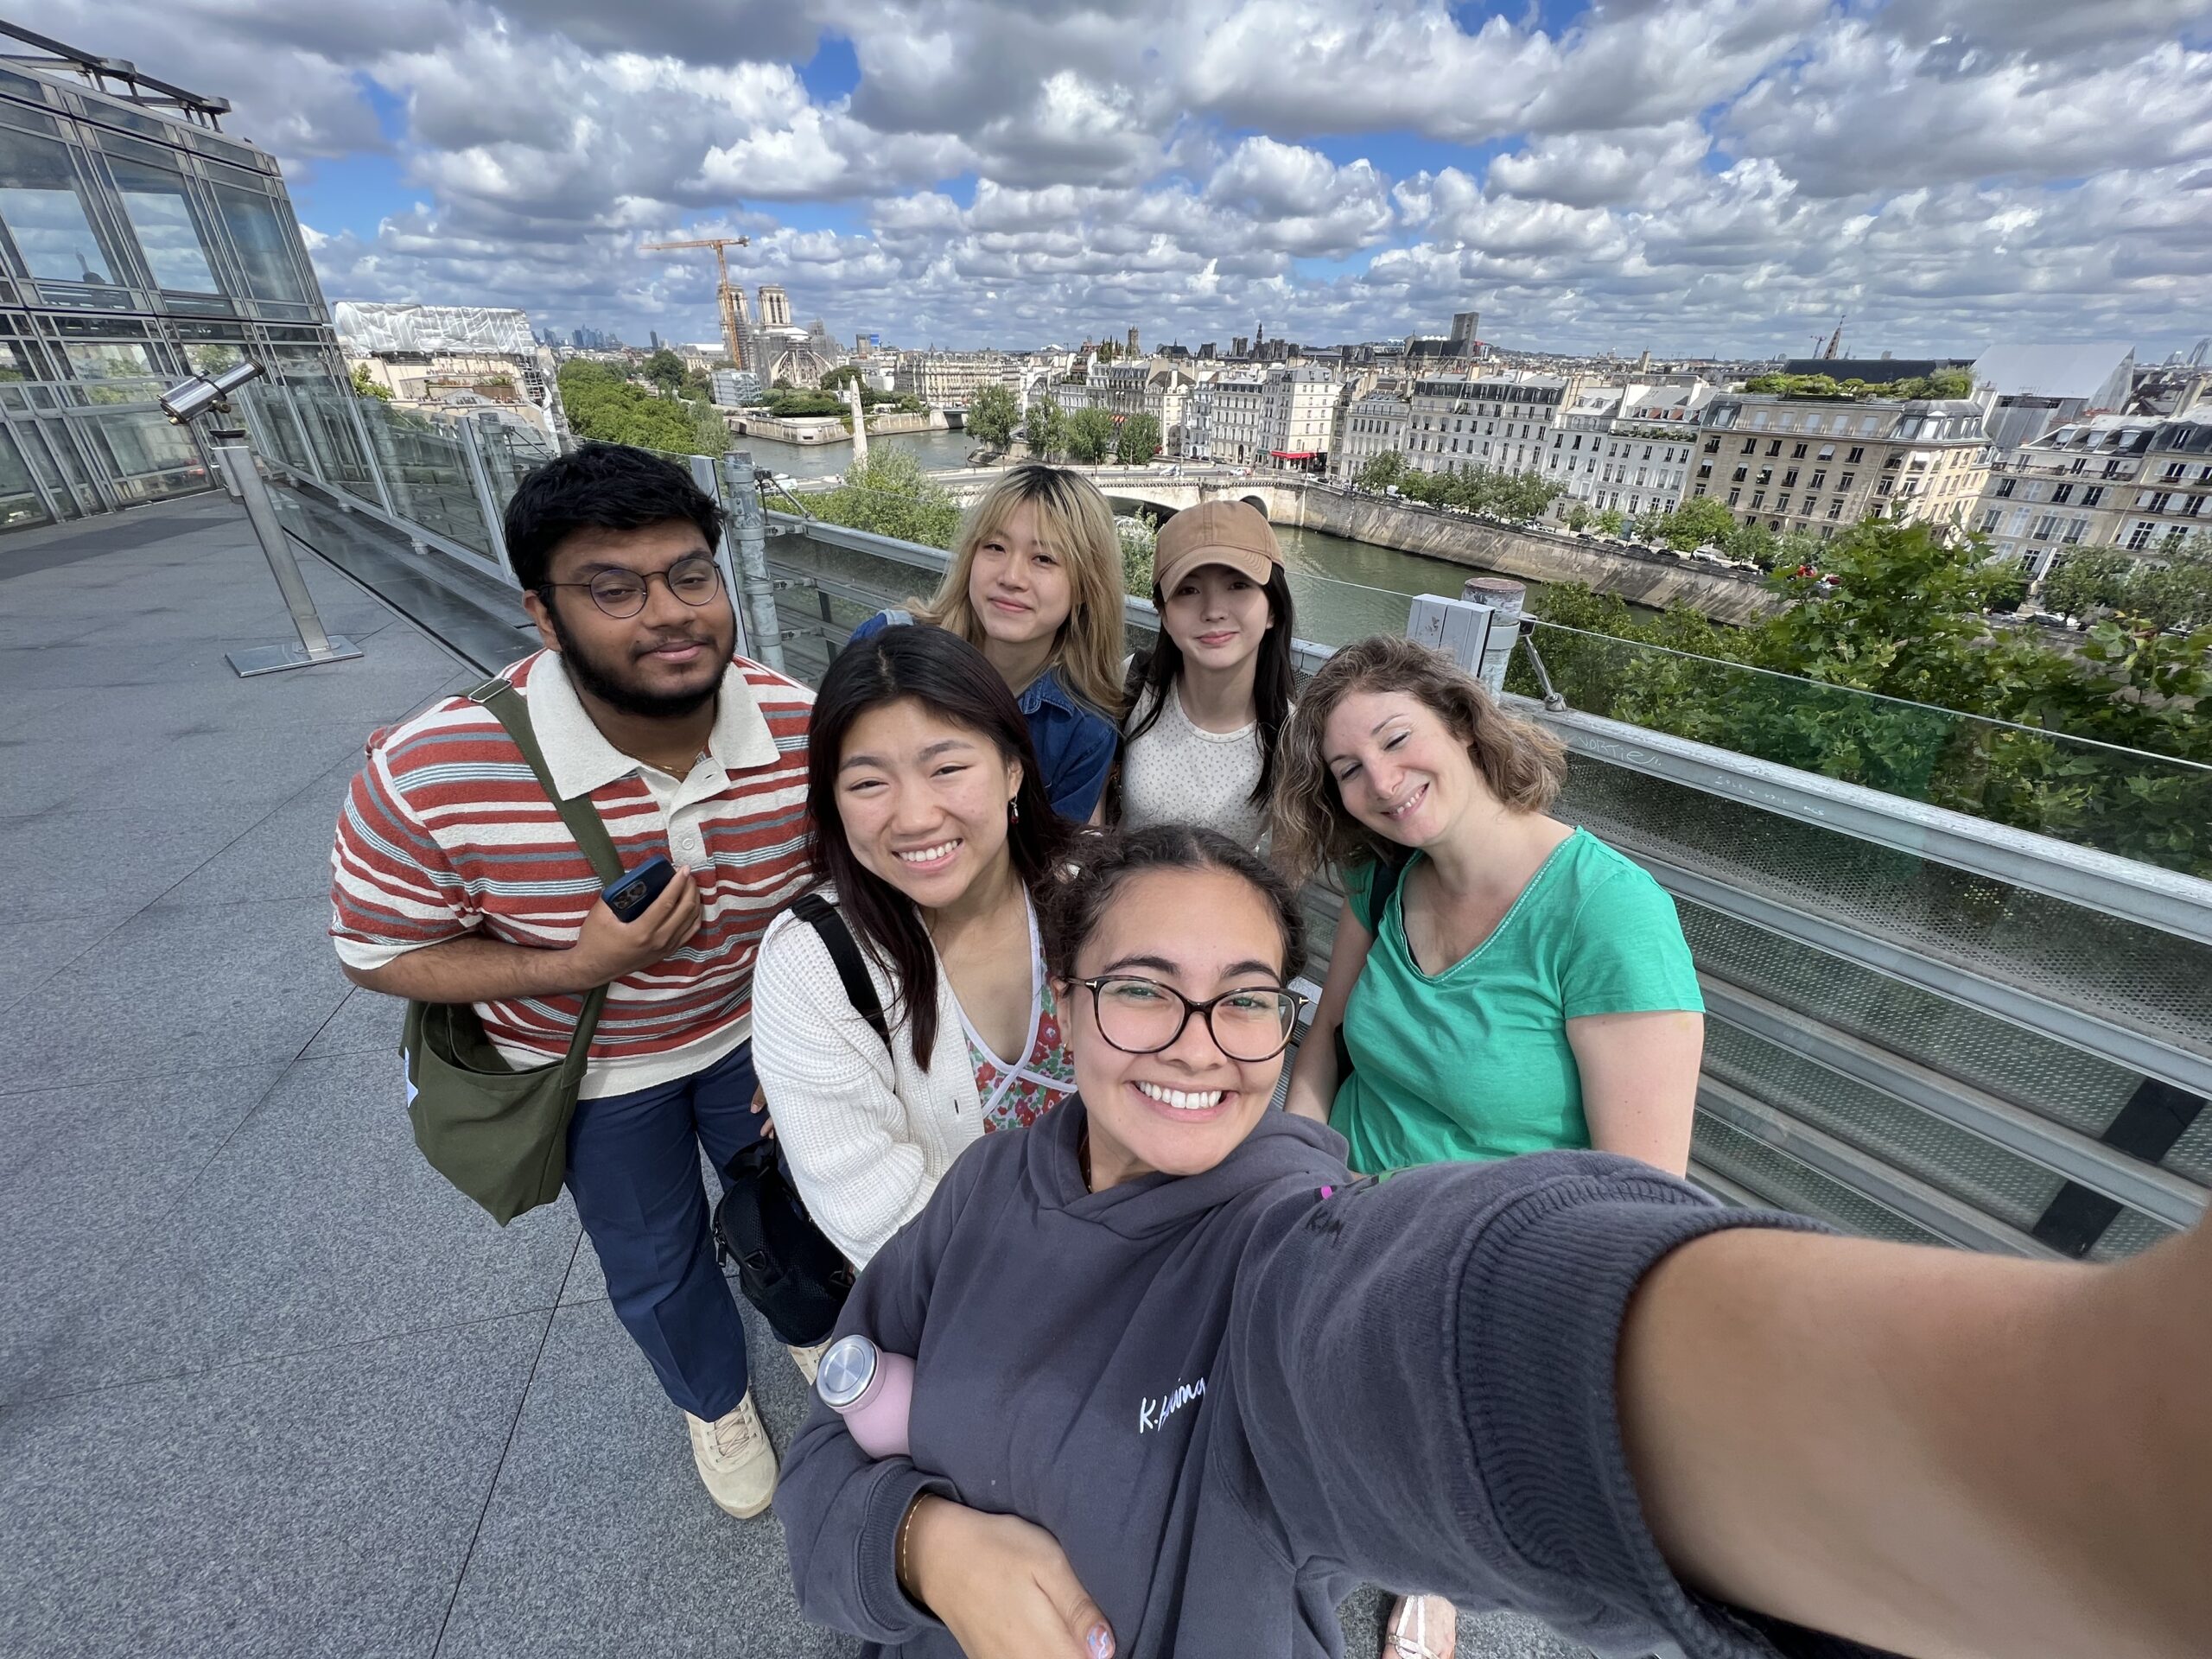 Group photo of students overseeing Paris skyline